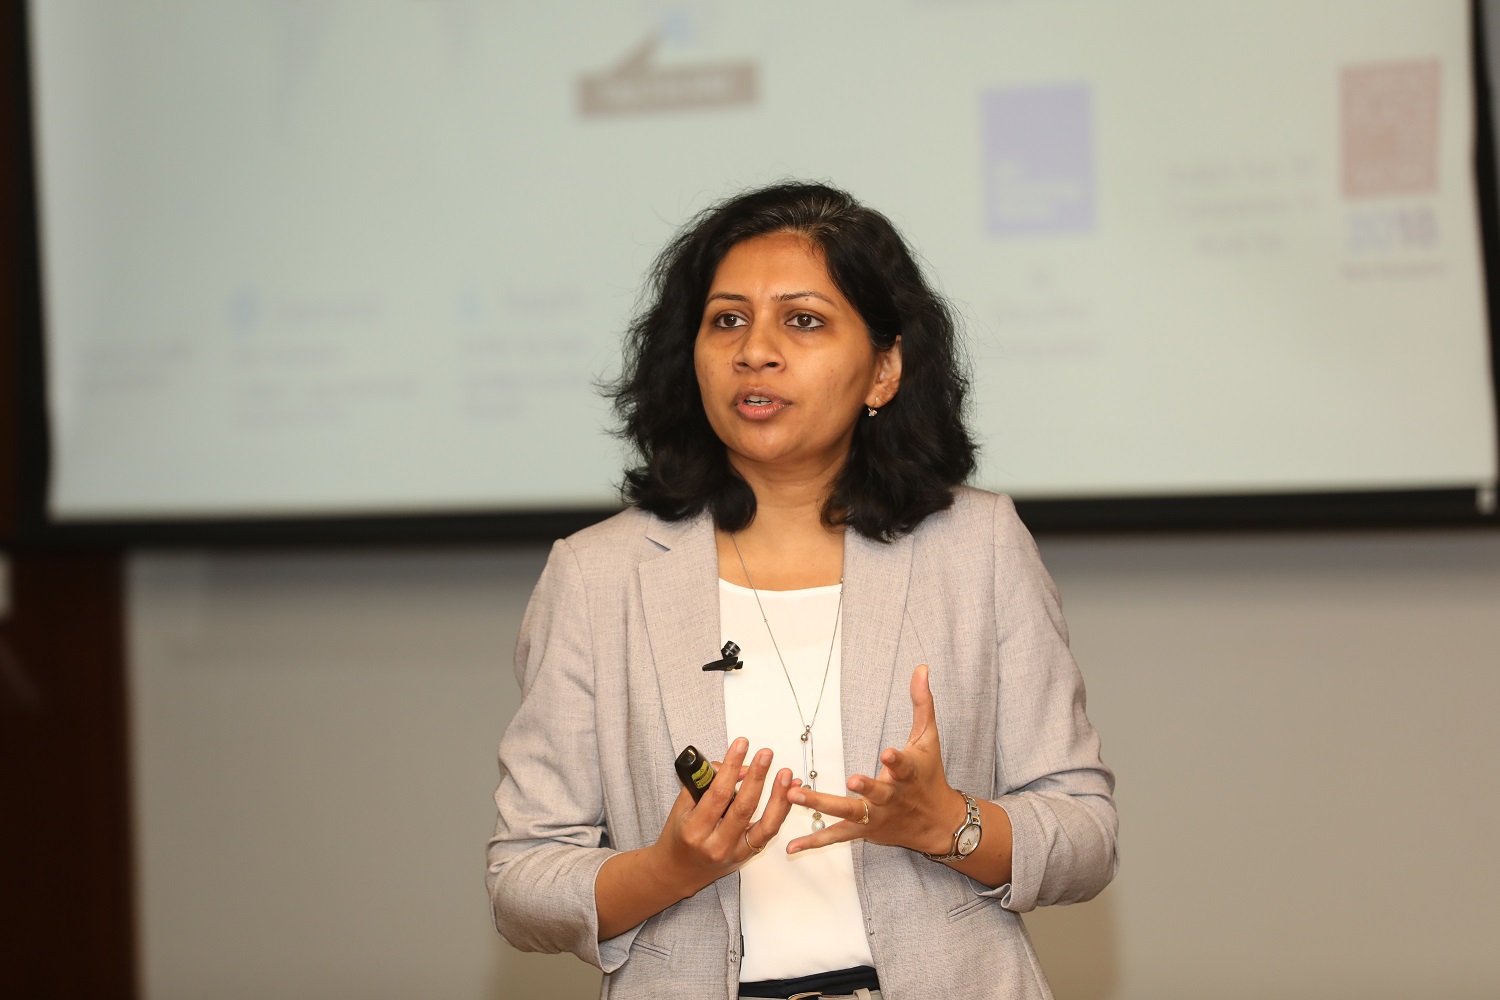 Vasuta Agarwal, Chief Business Officer - Consumer Platform Advertising, InMobi, delivers a talk on ‘Global Marketing’ to the Post Graduate Programme in Management students, on 4th February 2023. The lecture was part of the course in Marketing offered by Prof. Malika of the Marketing area at IIMB.